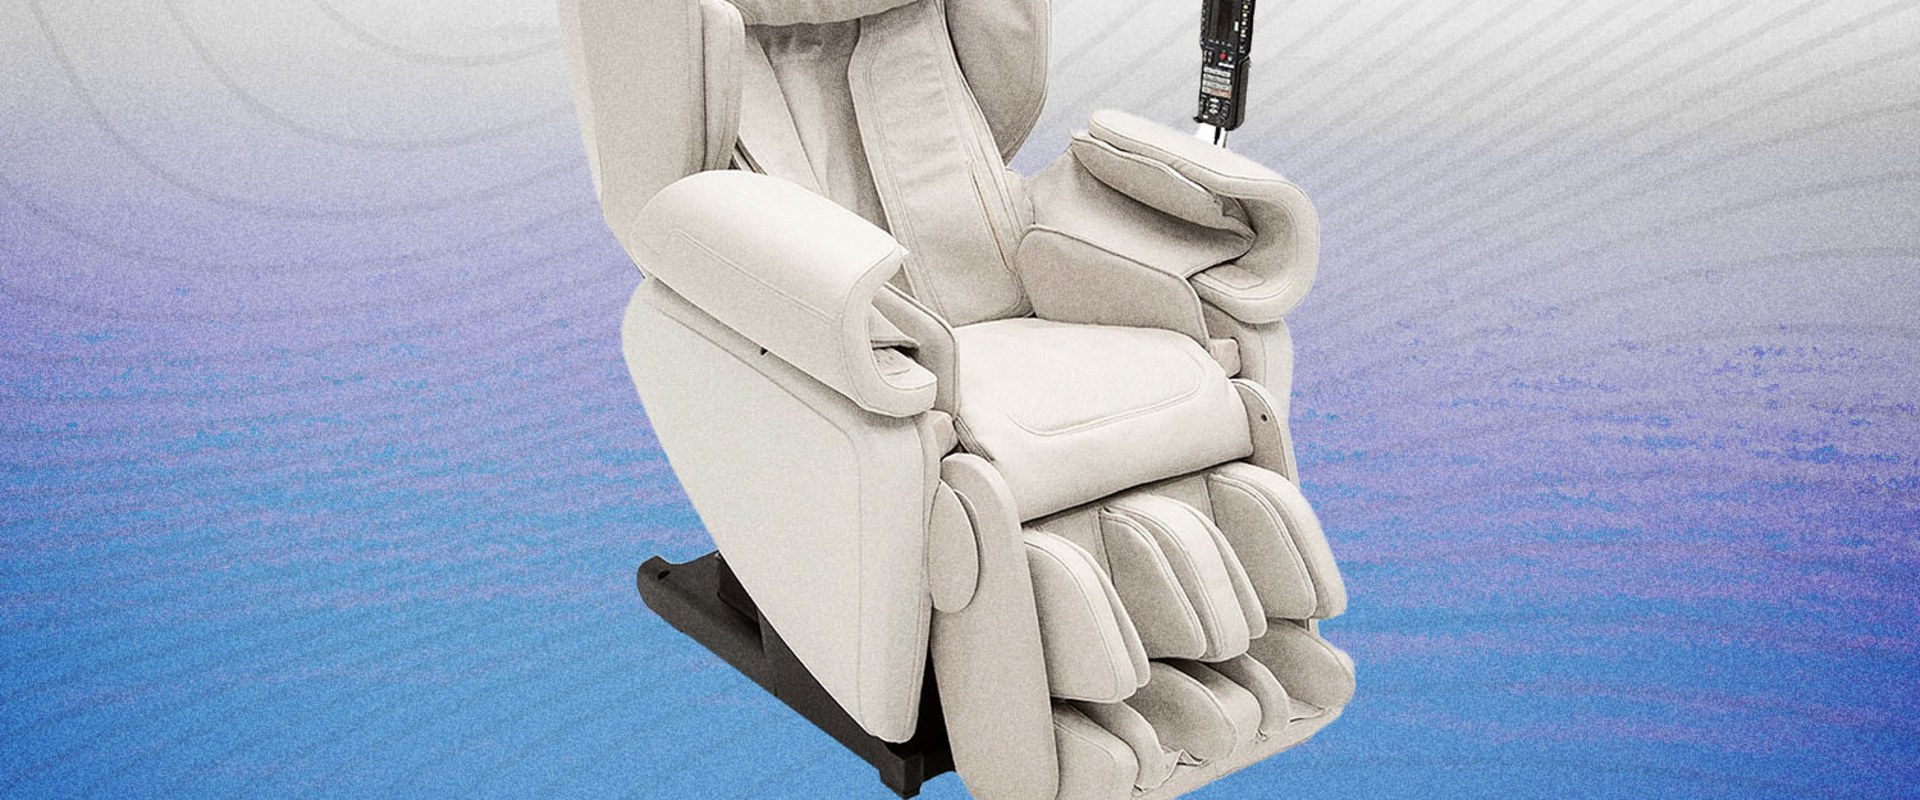 How Long Does a Massage Chair Last?